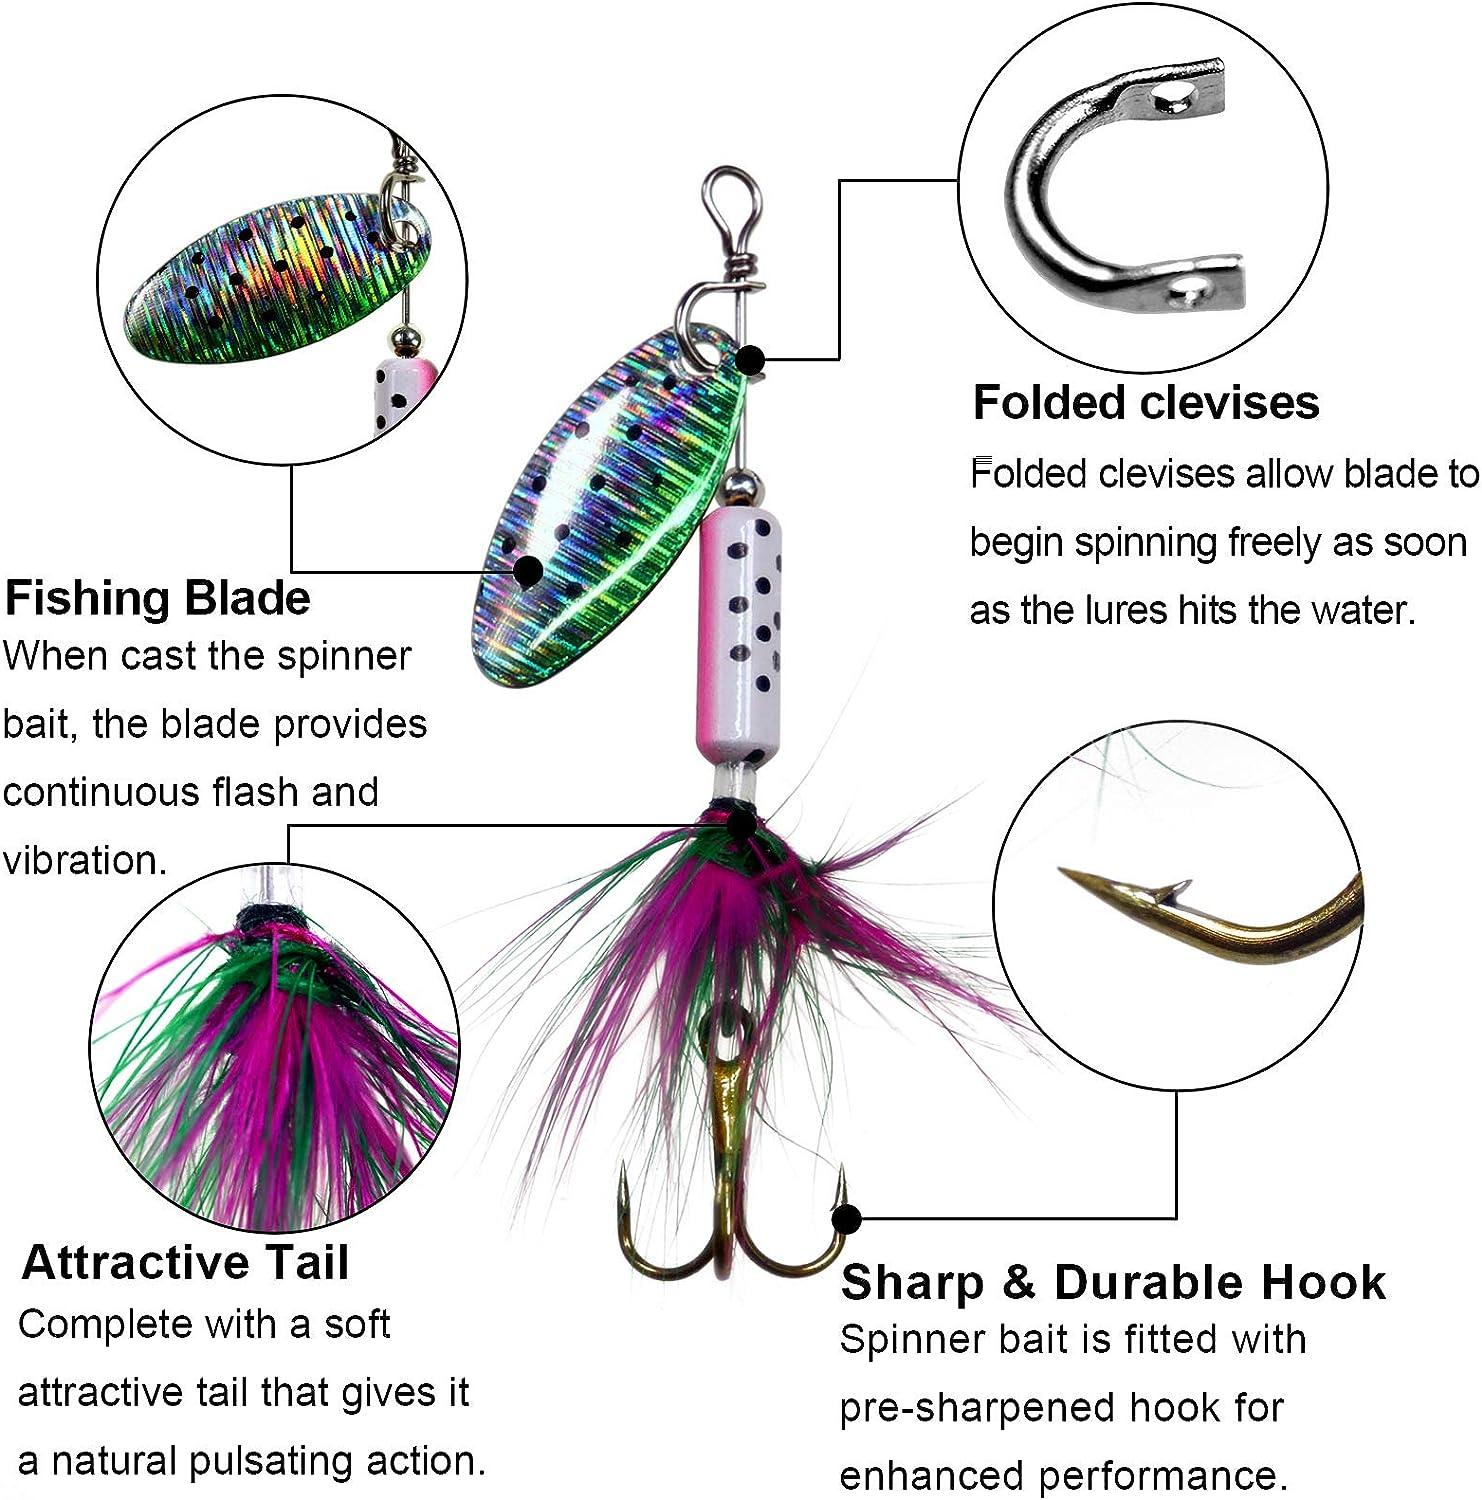 Premium Spinner Baits Fishing Lures for Bass, Trout, and Crappie